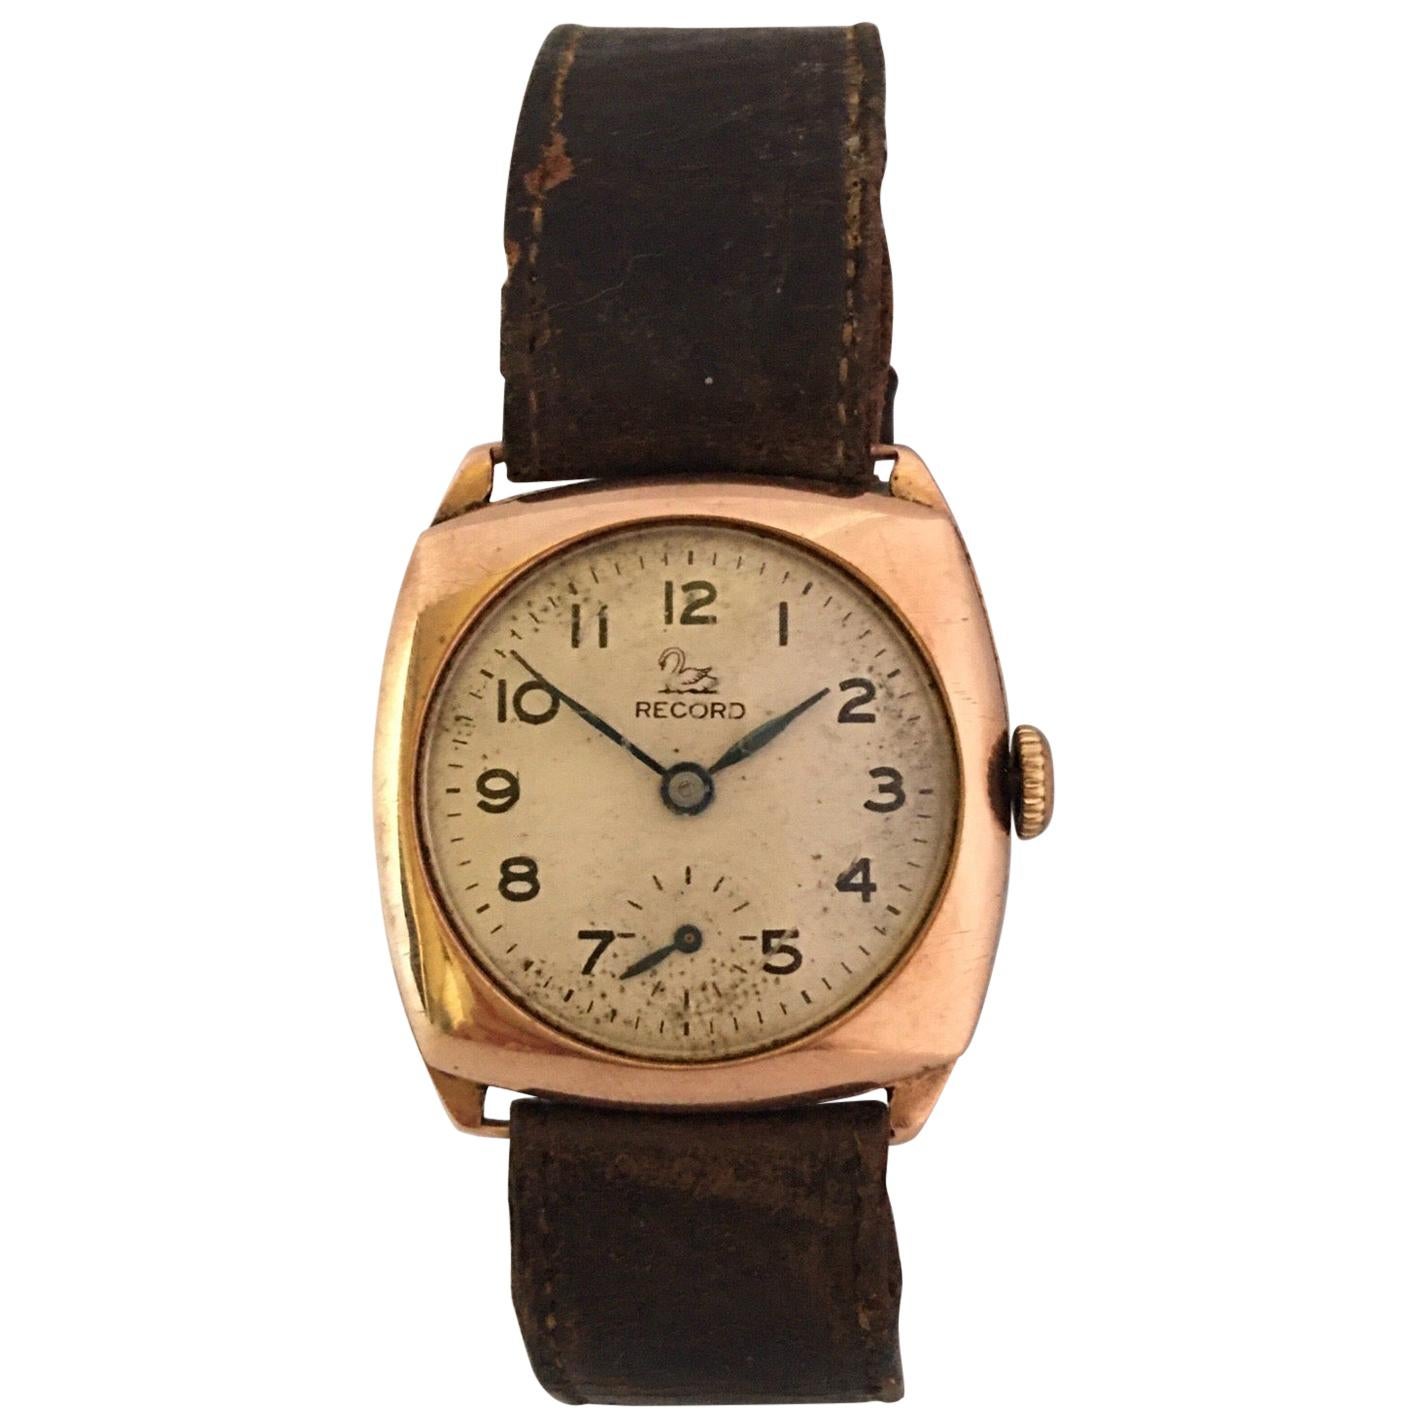 9 Karat Gold Vintage 1950s Récord Cushion Shaped Mechanical Watch For Sale